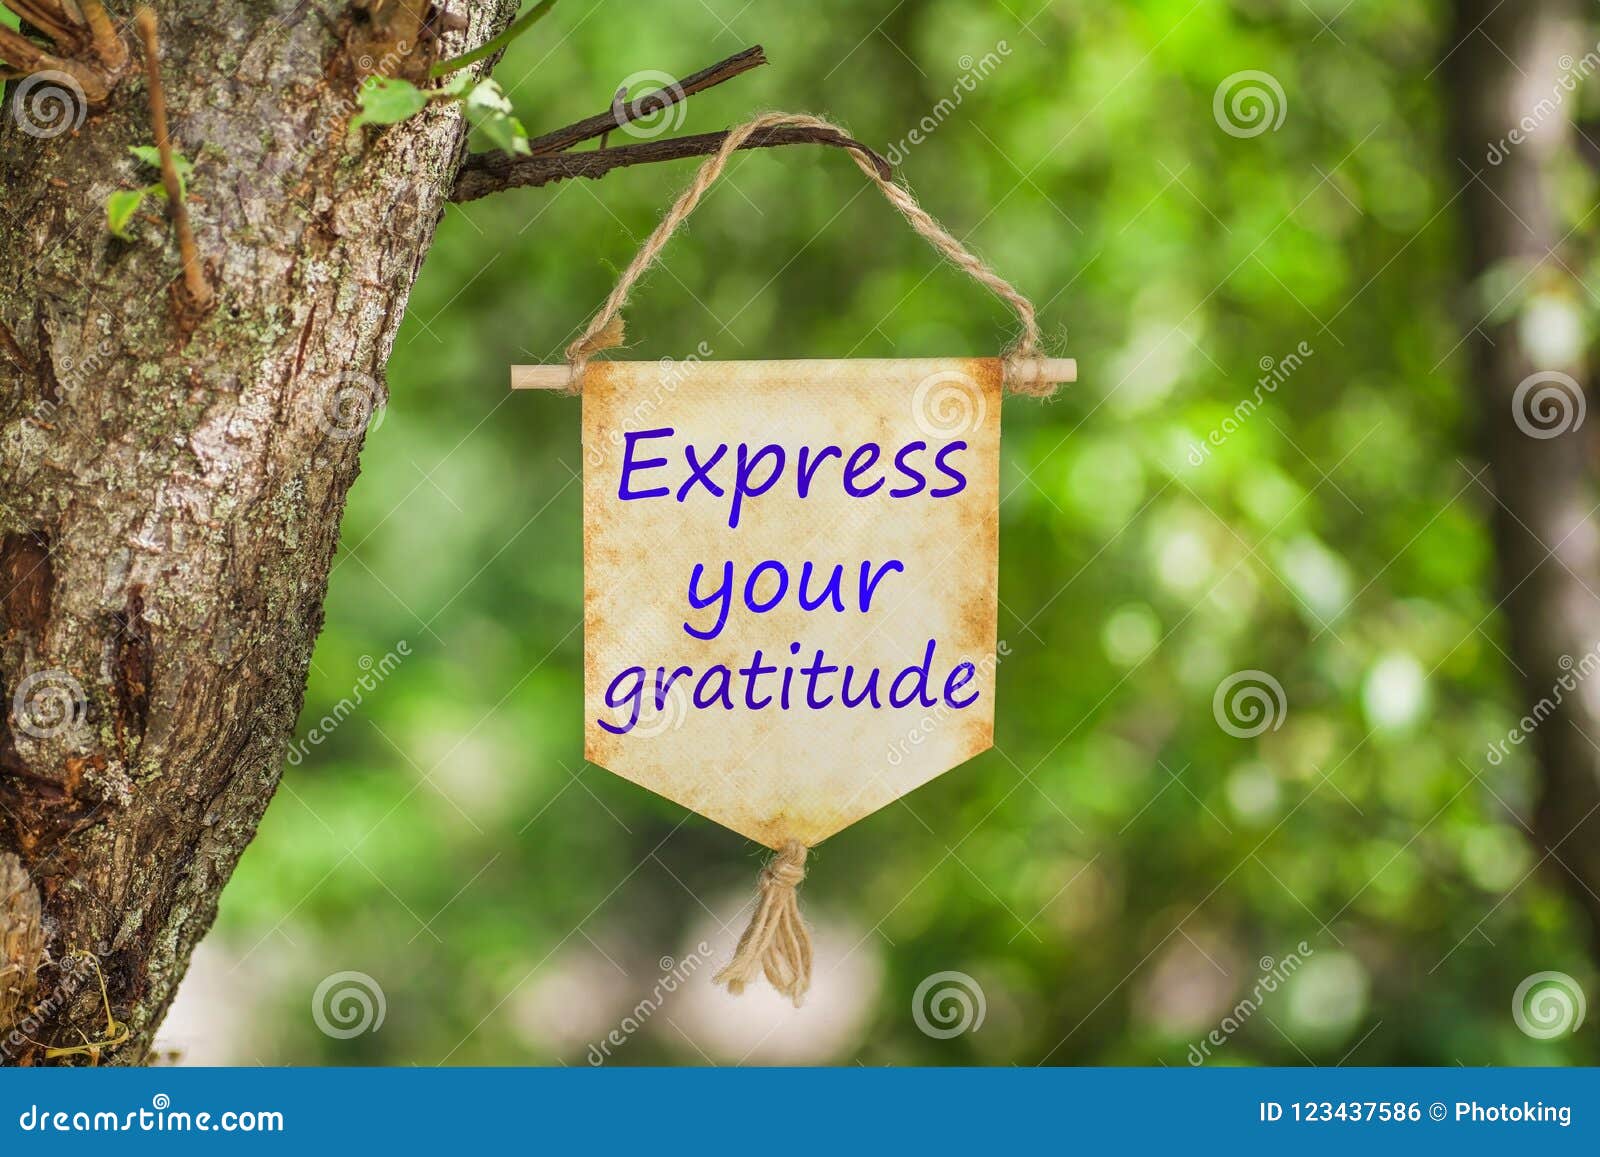 express your gratitude on paper scroll